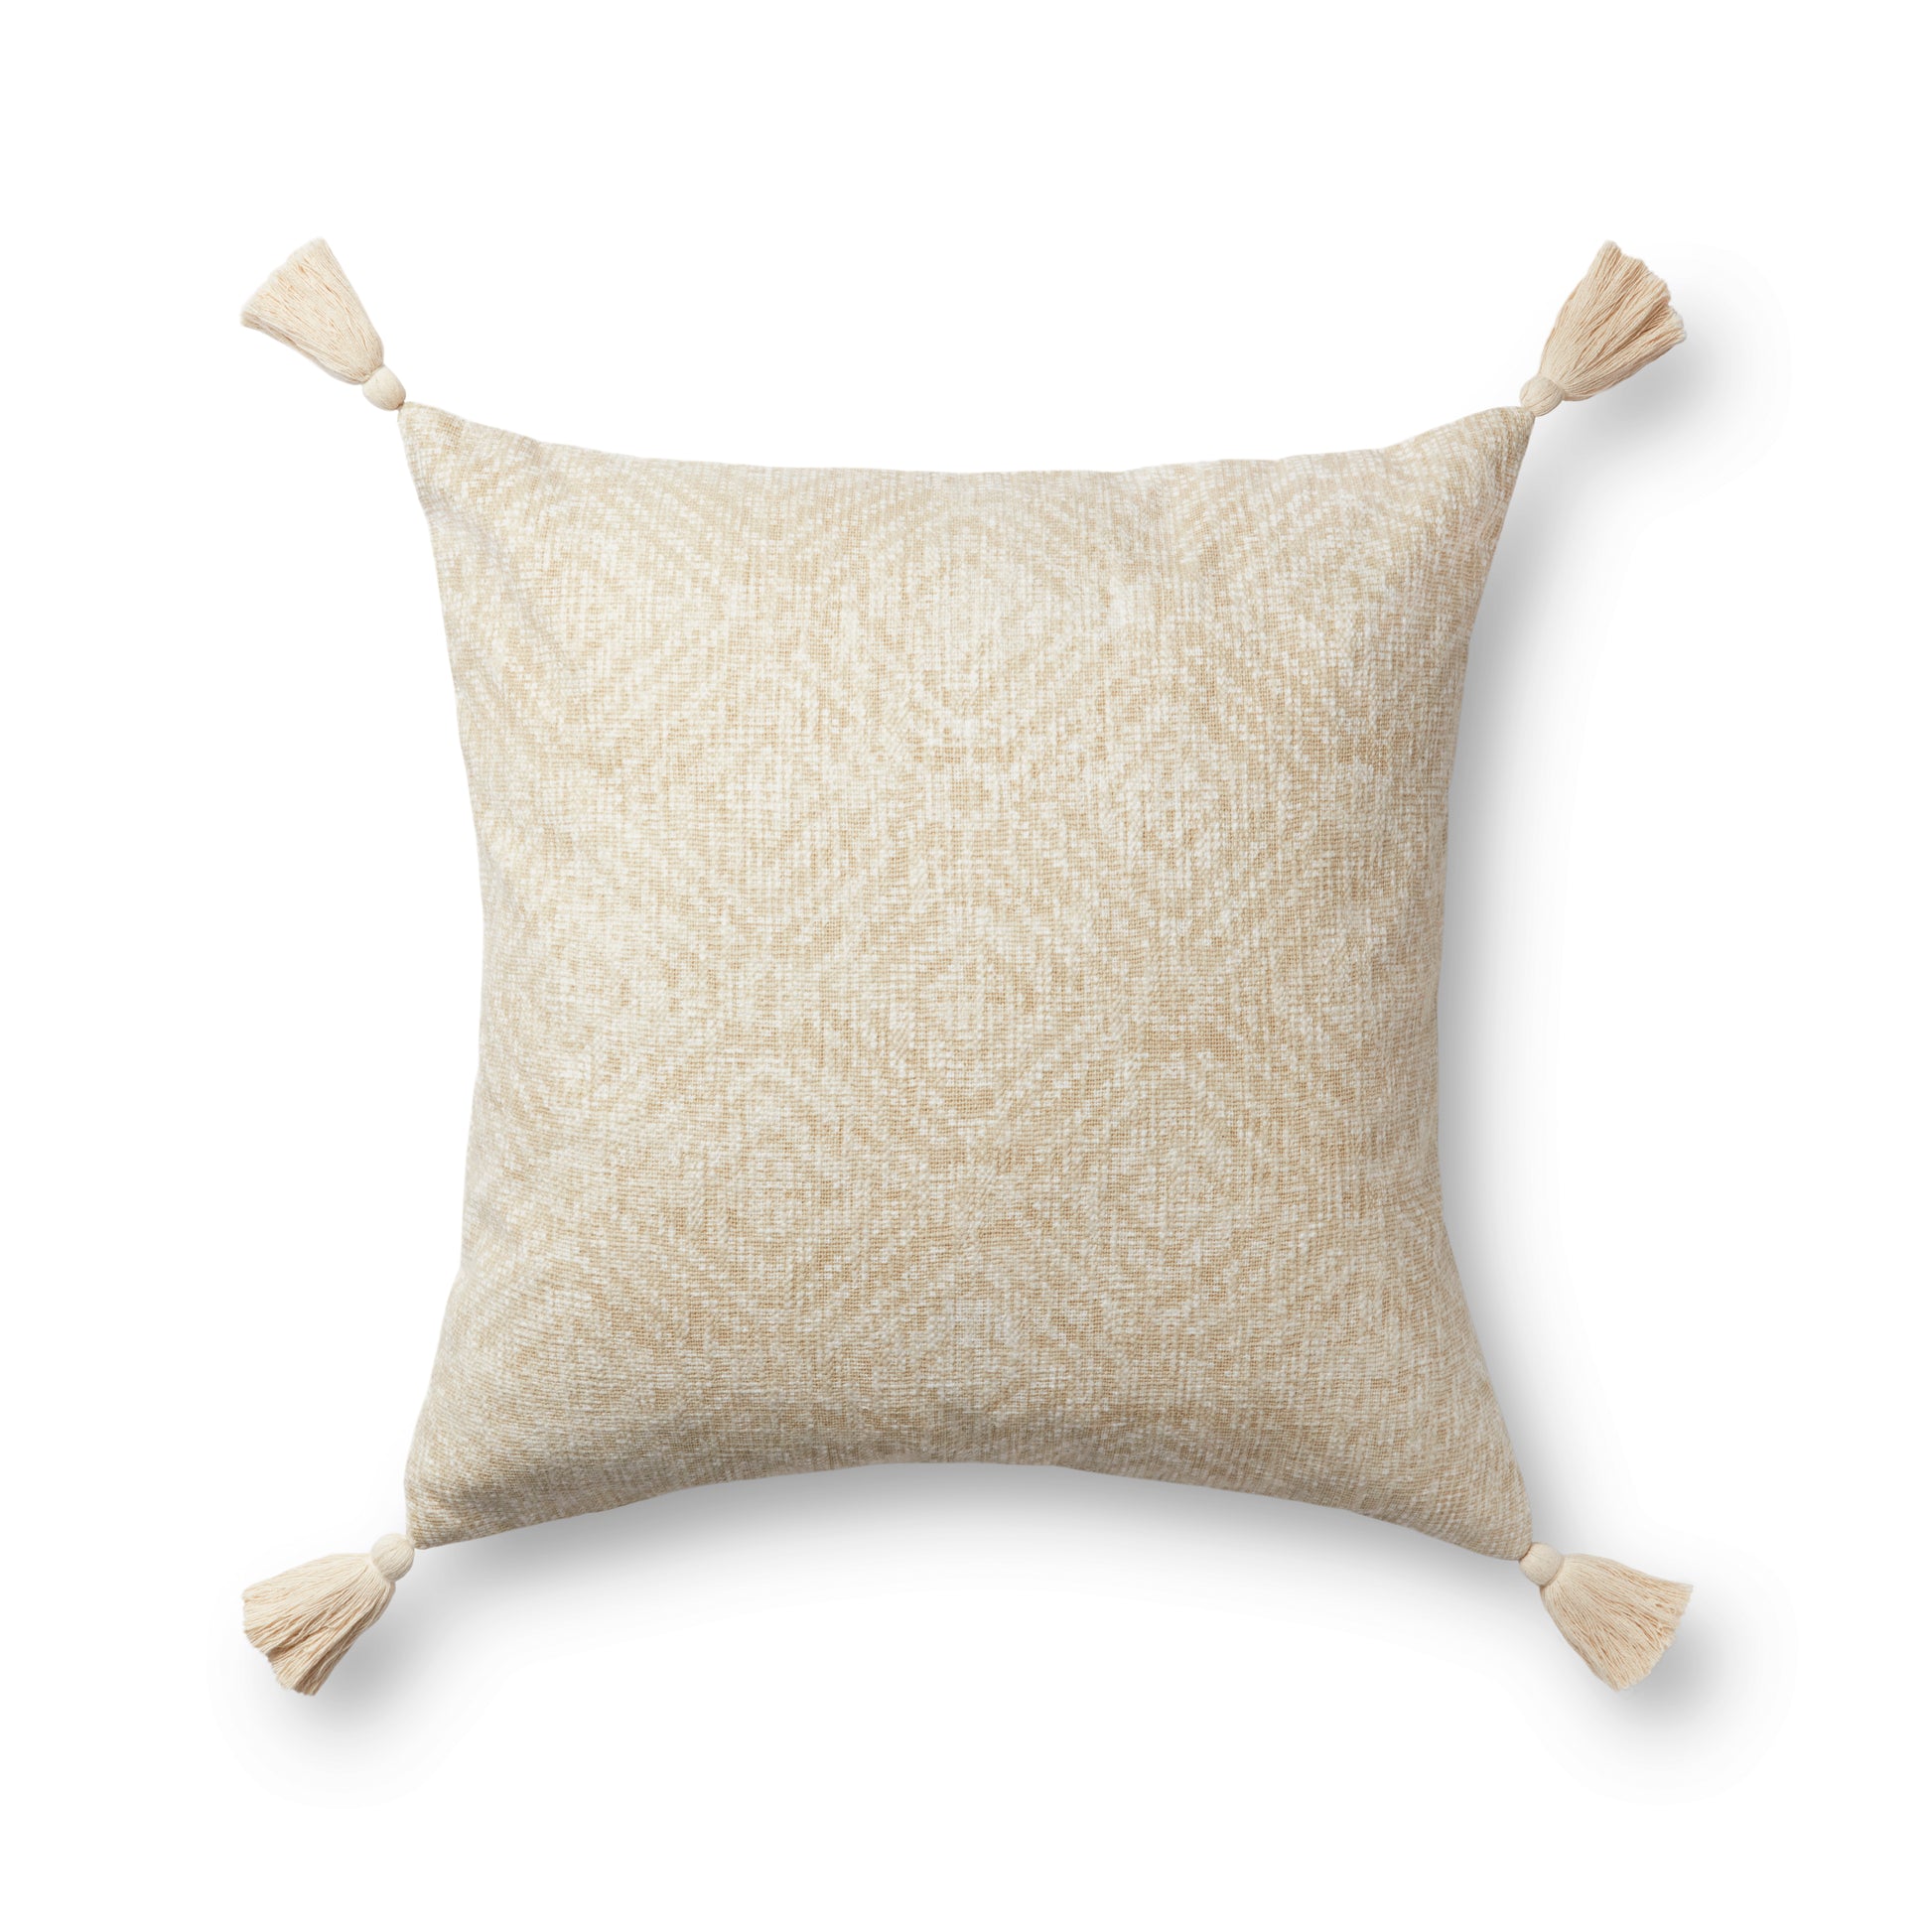 Photo of a pillow;  P0621 Ivory 22" x 22" Cover w/Poly Pillow